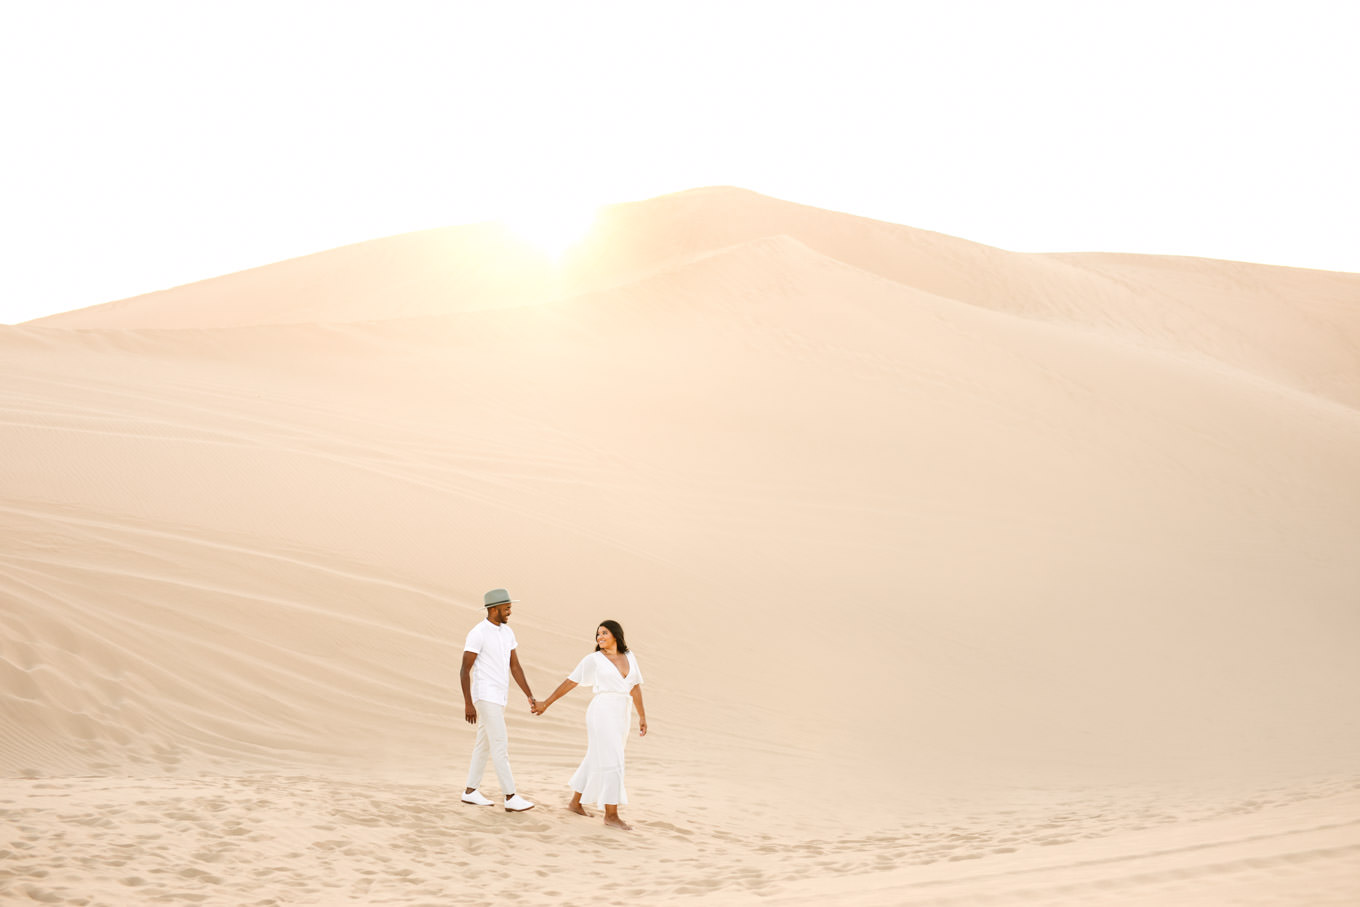 Sand dunes engagement session | Engagement, elopement, and wedding photography roundup of Mary Costa’s favorite images from 2020 | Colorful and elevated photography for fun-loving couples in Southern California | #2020wedding #elopement #weddingphoto #weddingphotography #microwedding   Source: Mary Costa Photography | Los Angeles